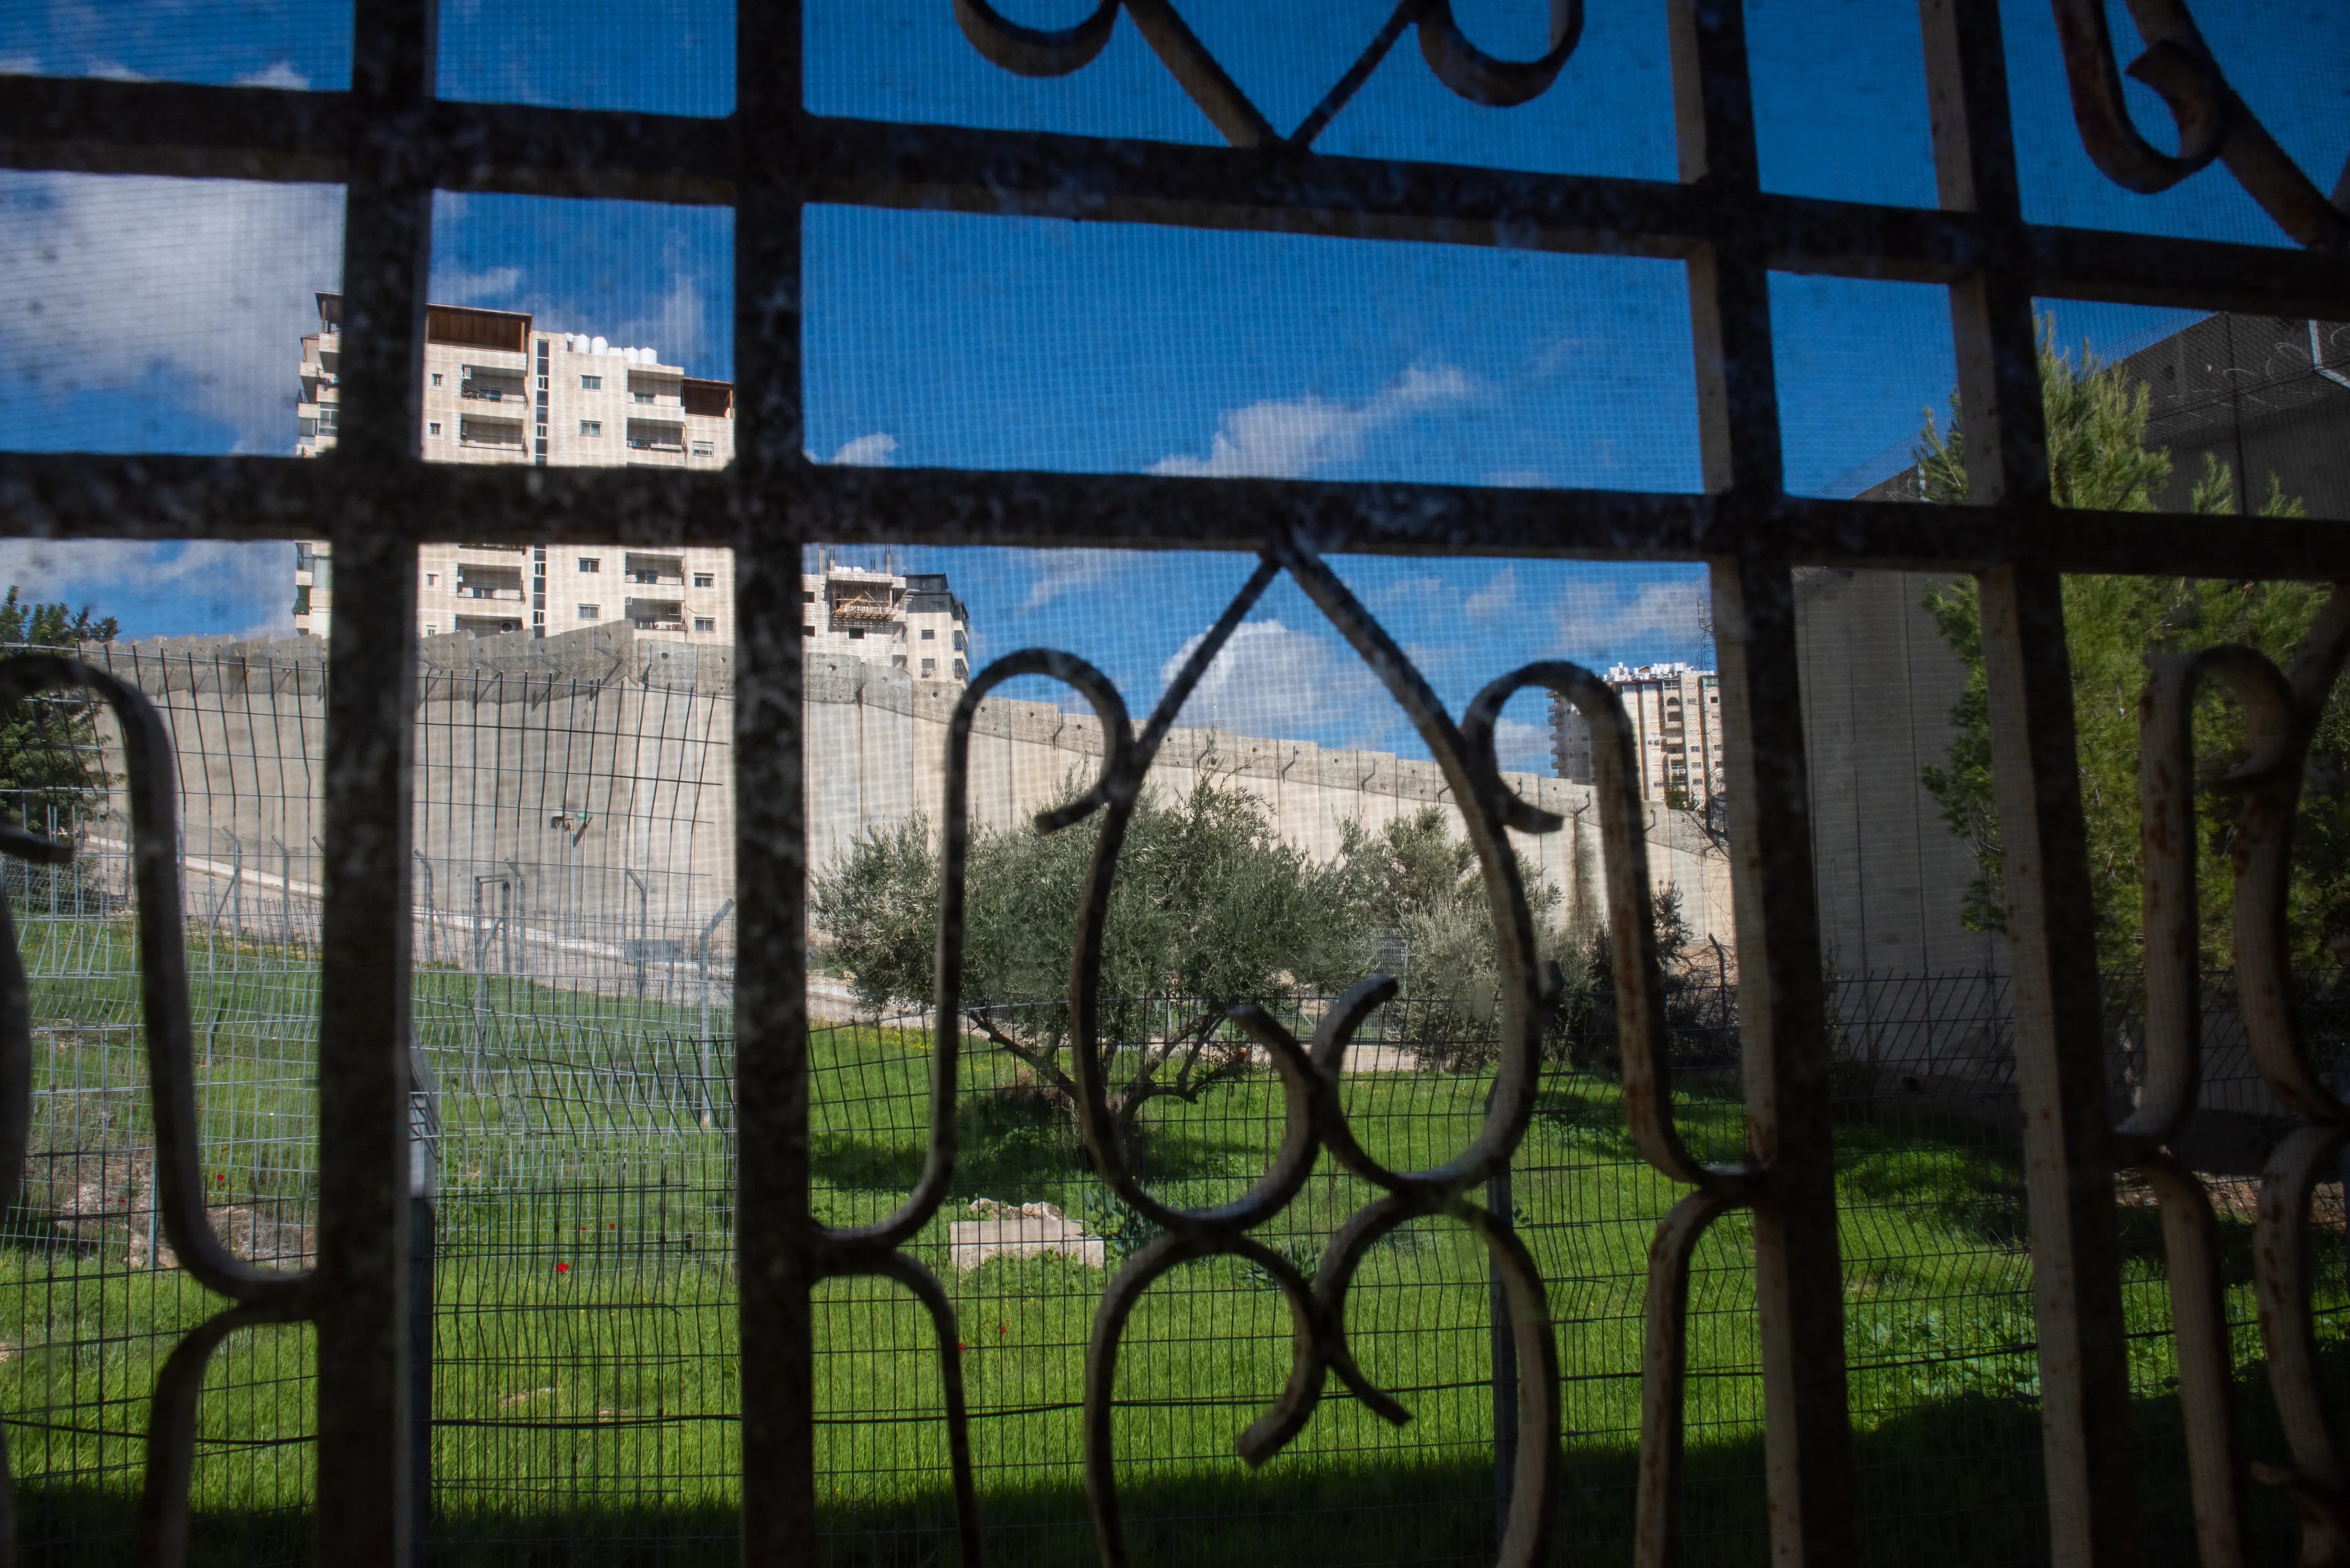 A view of the separation wall between Israel and the Palestinian Territories from behind a window in the Comboni Sisters' house in East Jerusalem.?w=200&h=150